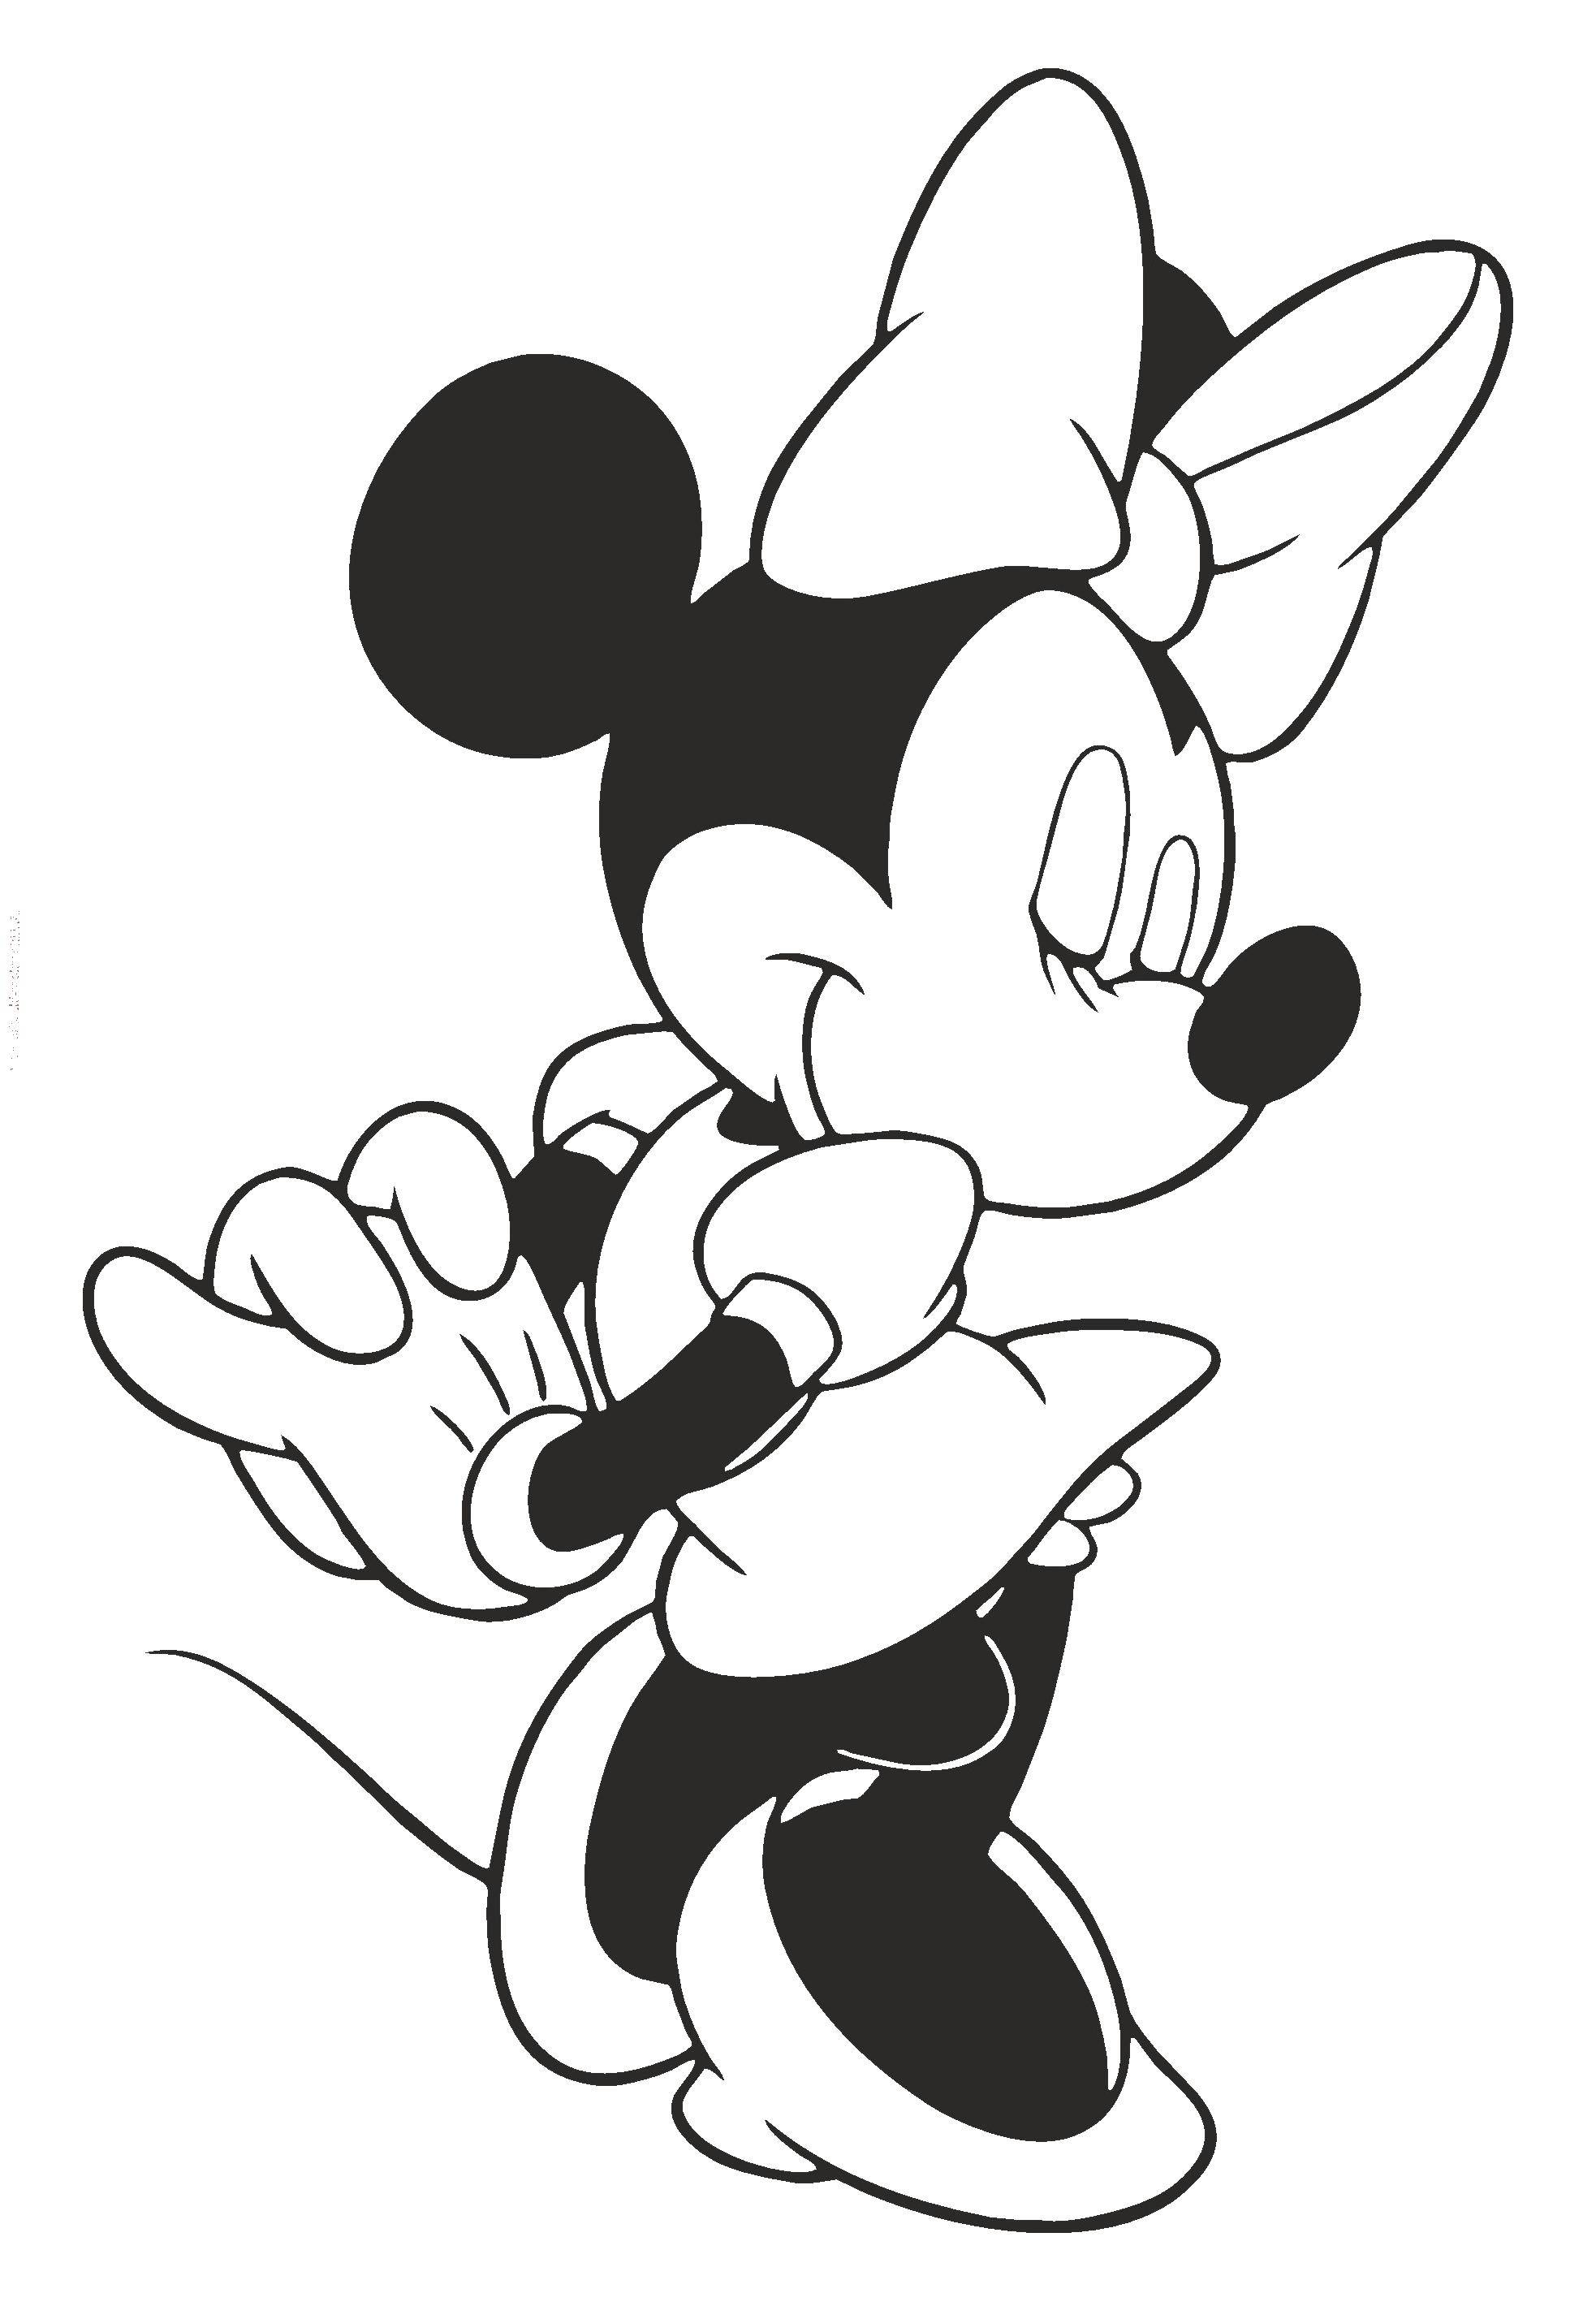 Coloring Beautiful Minnie mouse. Category Mickey mouse. Tags:  Disney, Mickey Mouse, Minnie Mouse.